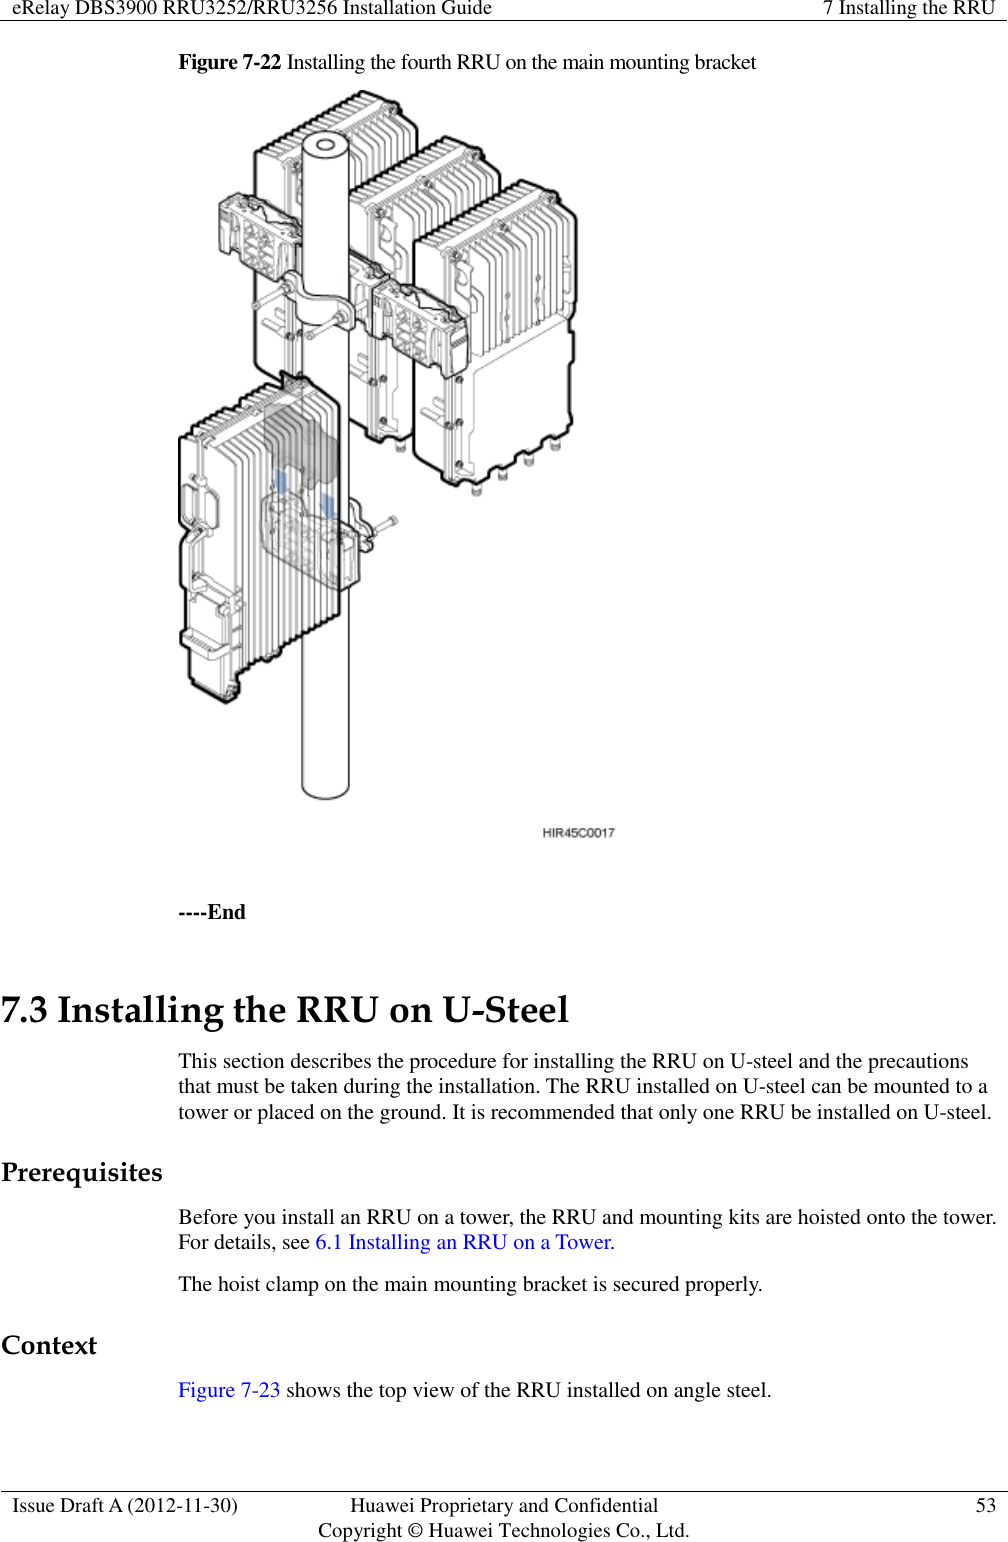 eRelay DBS3900 RRU3252/RRU3256 Installation Guide 7 Installing the RRU  Issue Draft A (2012-11-30) Huawei Proprietary and Confidential                                     Copyright © Huawei Technologies Co., Ltd. 53  Figure 7-22 Installing the fourth RRU on the main mounting bracket   ----End 7.3 Installing the RRU on U-Steel This section describes the procedure for installing the RRU on U-steel and the precautions that must be taken during the installation. The RRU installed on U-steel can be mounted to a tower or placed on the ground. It is recommended that only one RRU be installed on U-steel.   Prerequisites Before you install an RRU on a tower, the RRU and mounting kits are hoisted onto the tower. For details, see 6.1 Installing an RRU on a Tower.   The hoist clamp on the main mounting bracket is secured properly. Context Figure 7-23 shows the top view of the RRU installed on angle steel. 